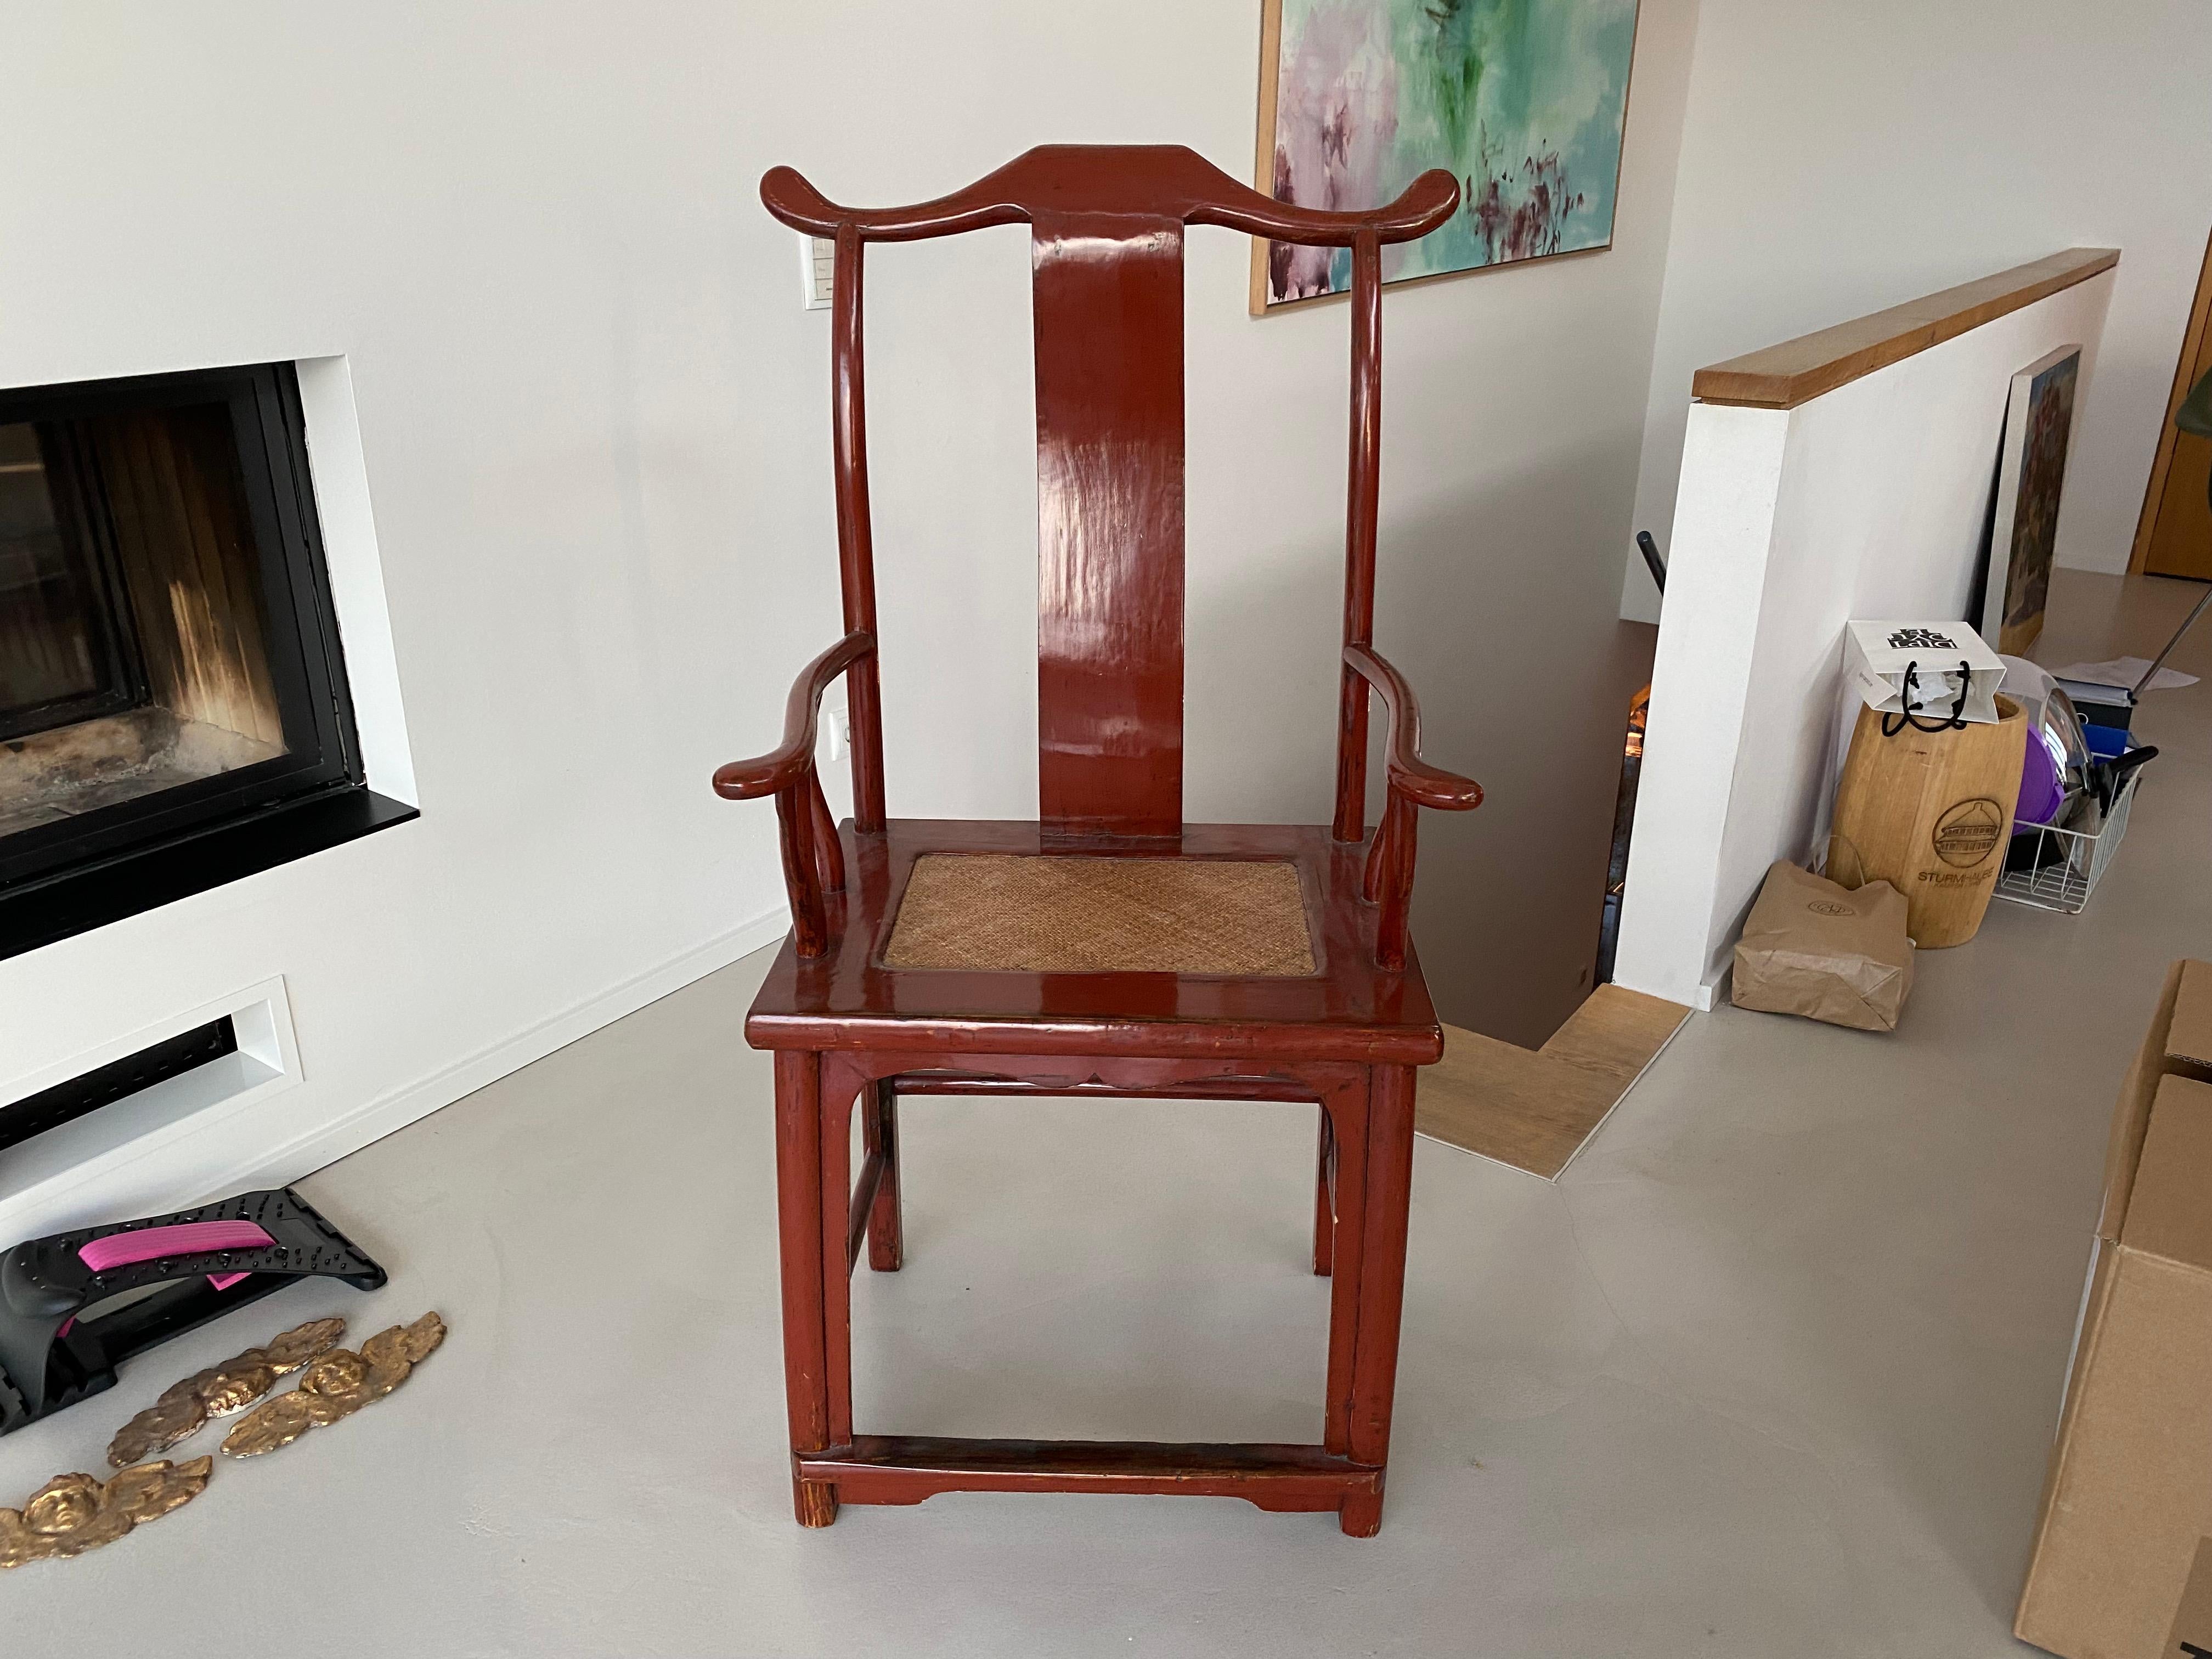 They are commonly referred to as 'Deng Gua Yi', which means lamp. The backrest of these chairs is reminiscent of the construction from which two lanterns were hung.
This seat, sometimes referred to as a 